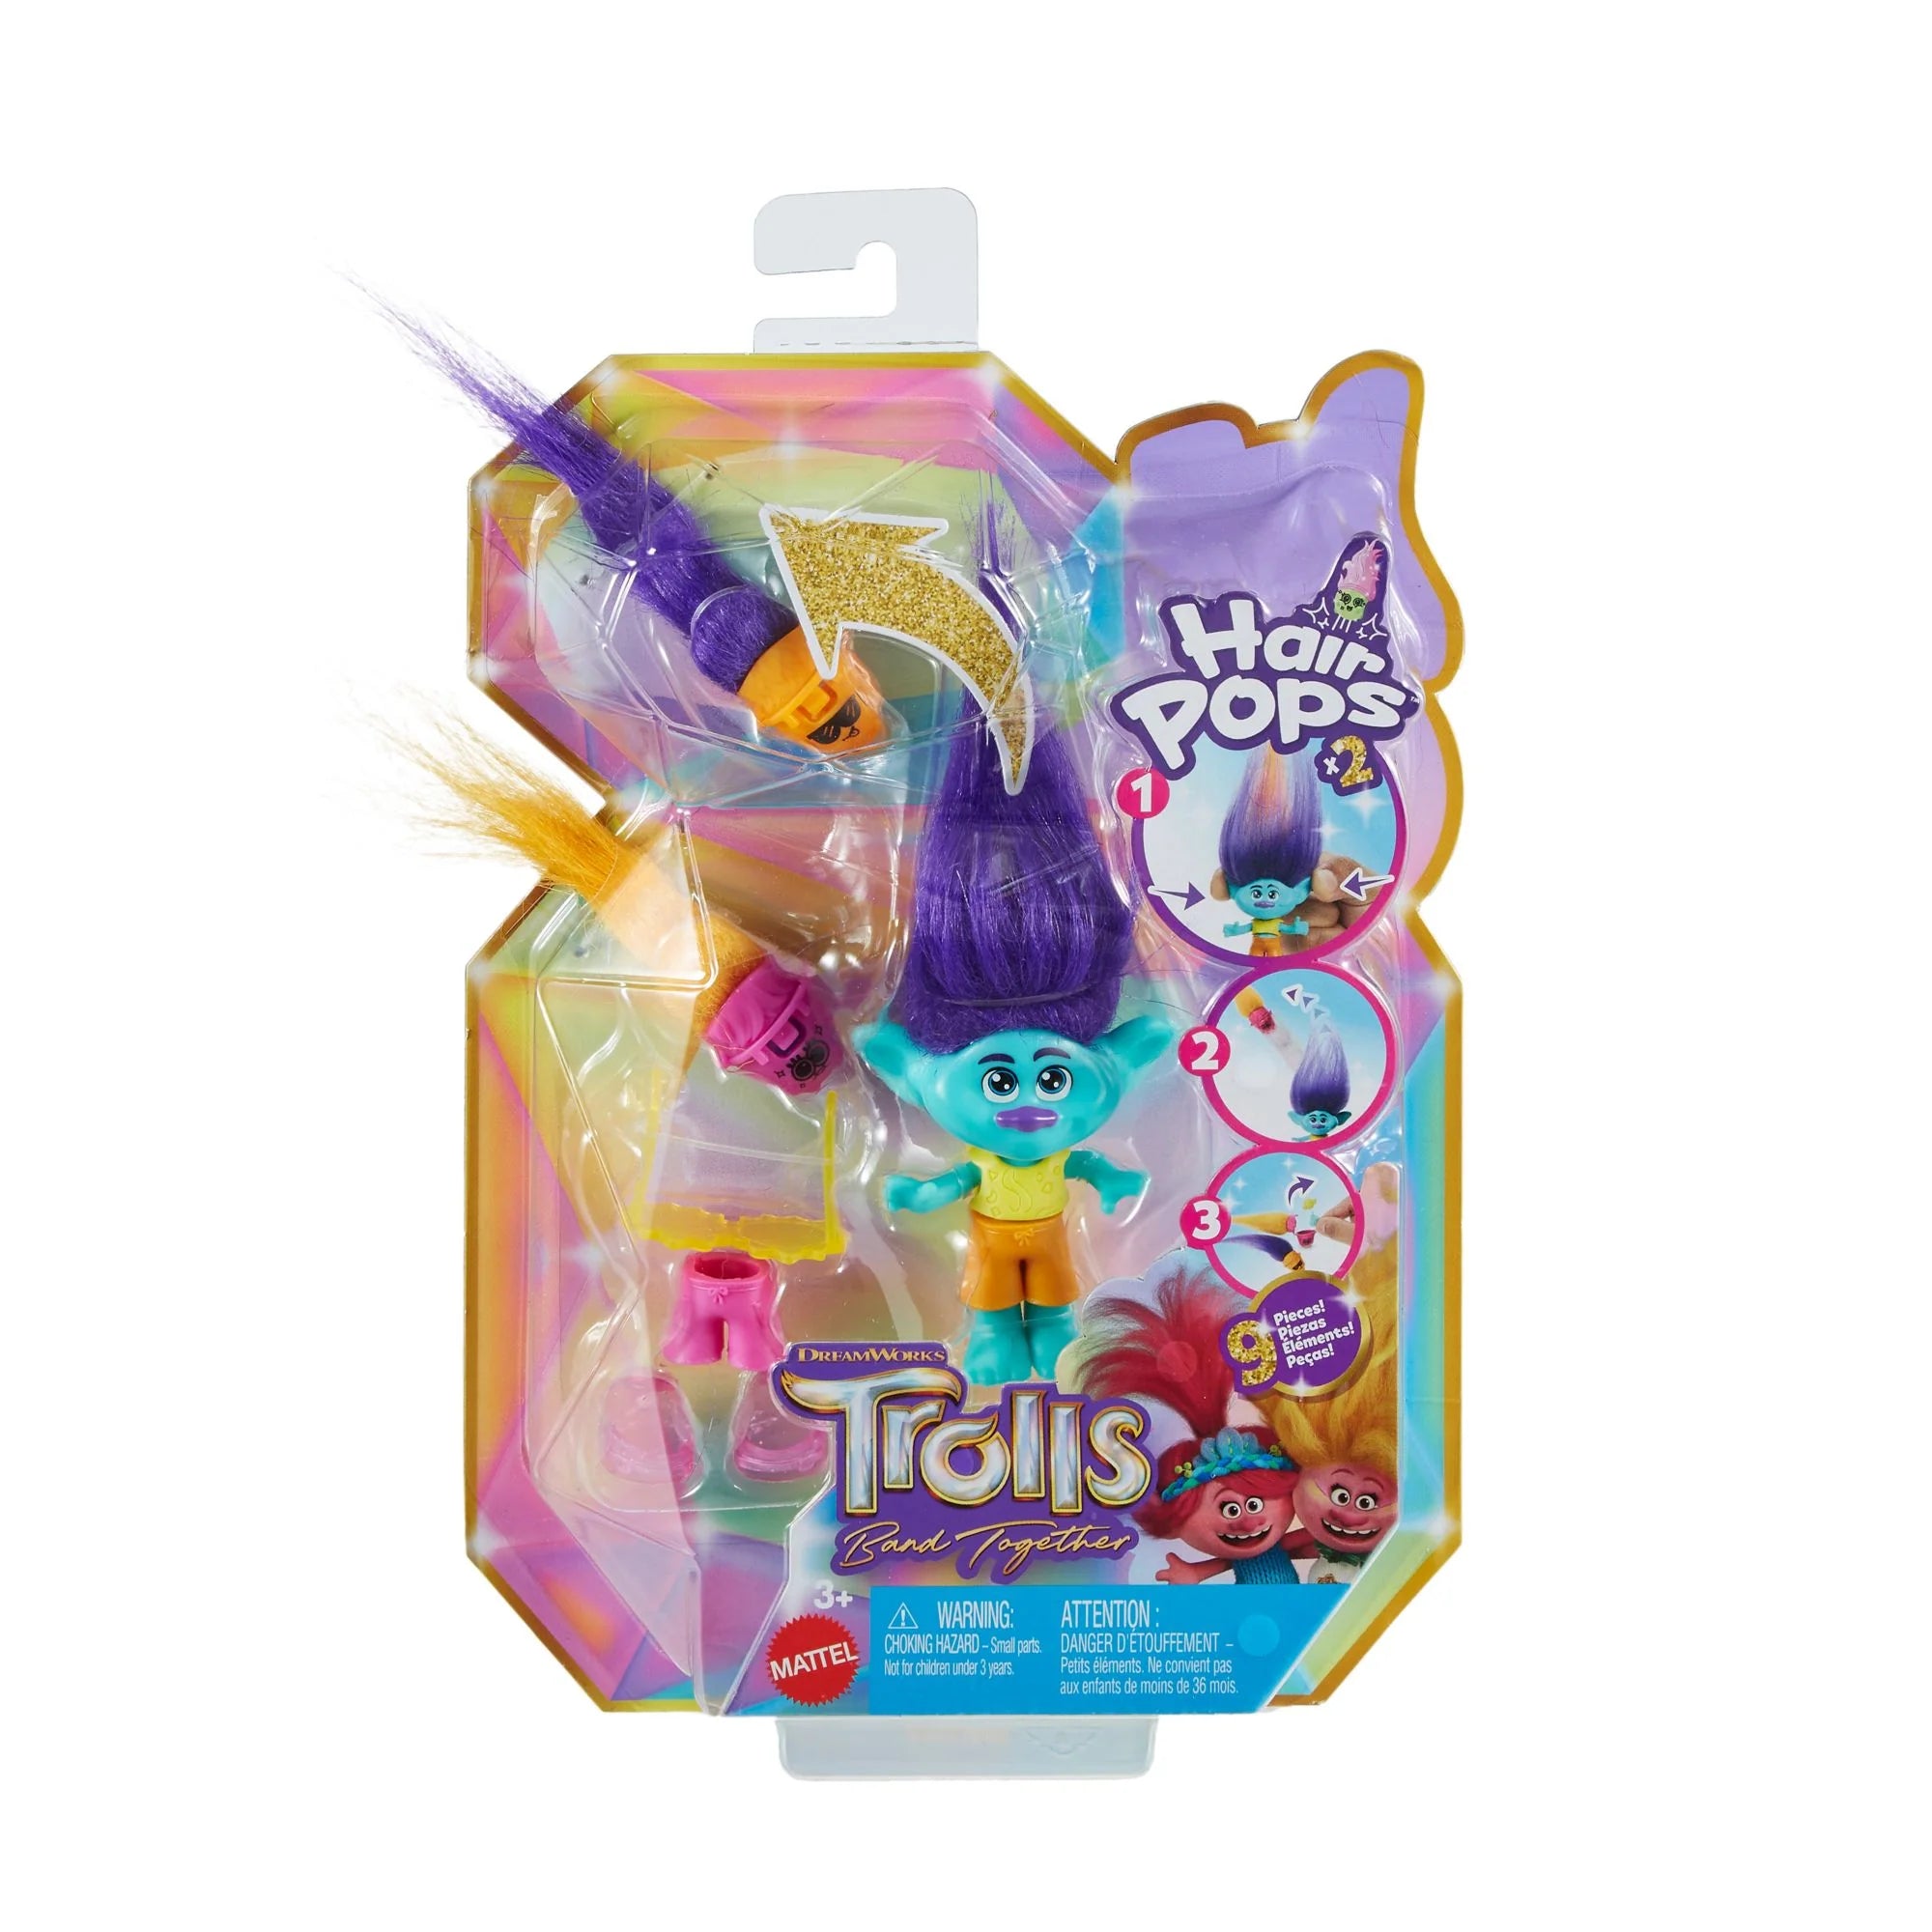 Trolls 3 Band Together Hair Pops Doll Branch